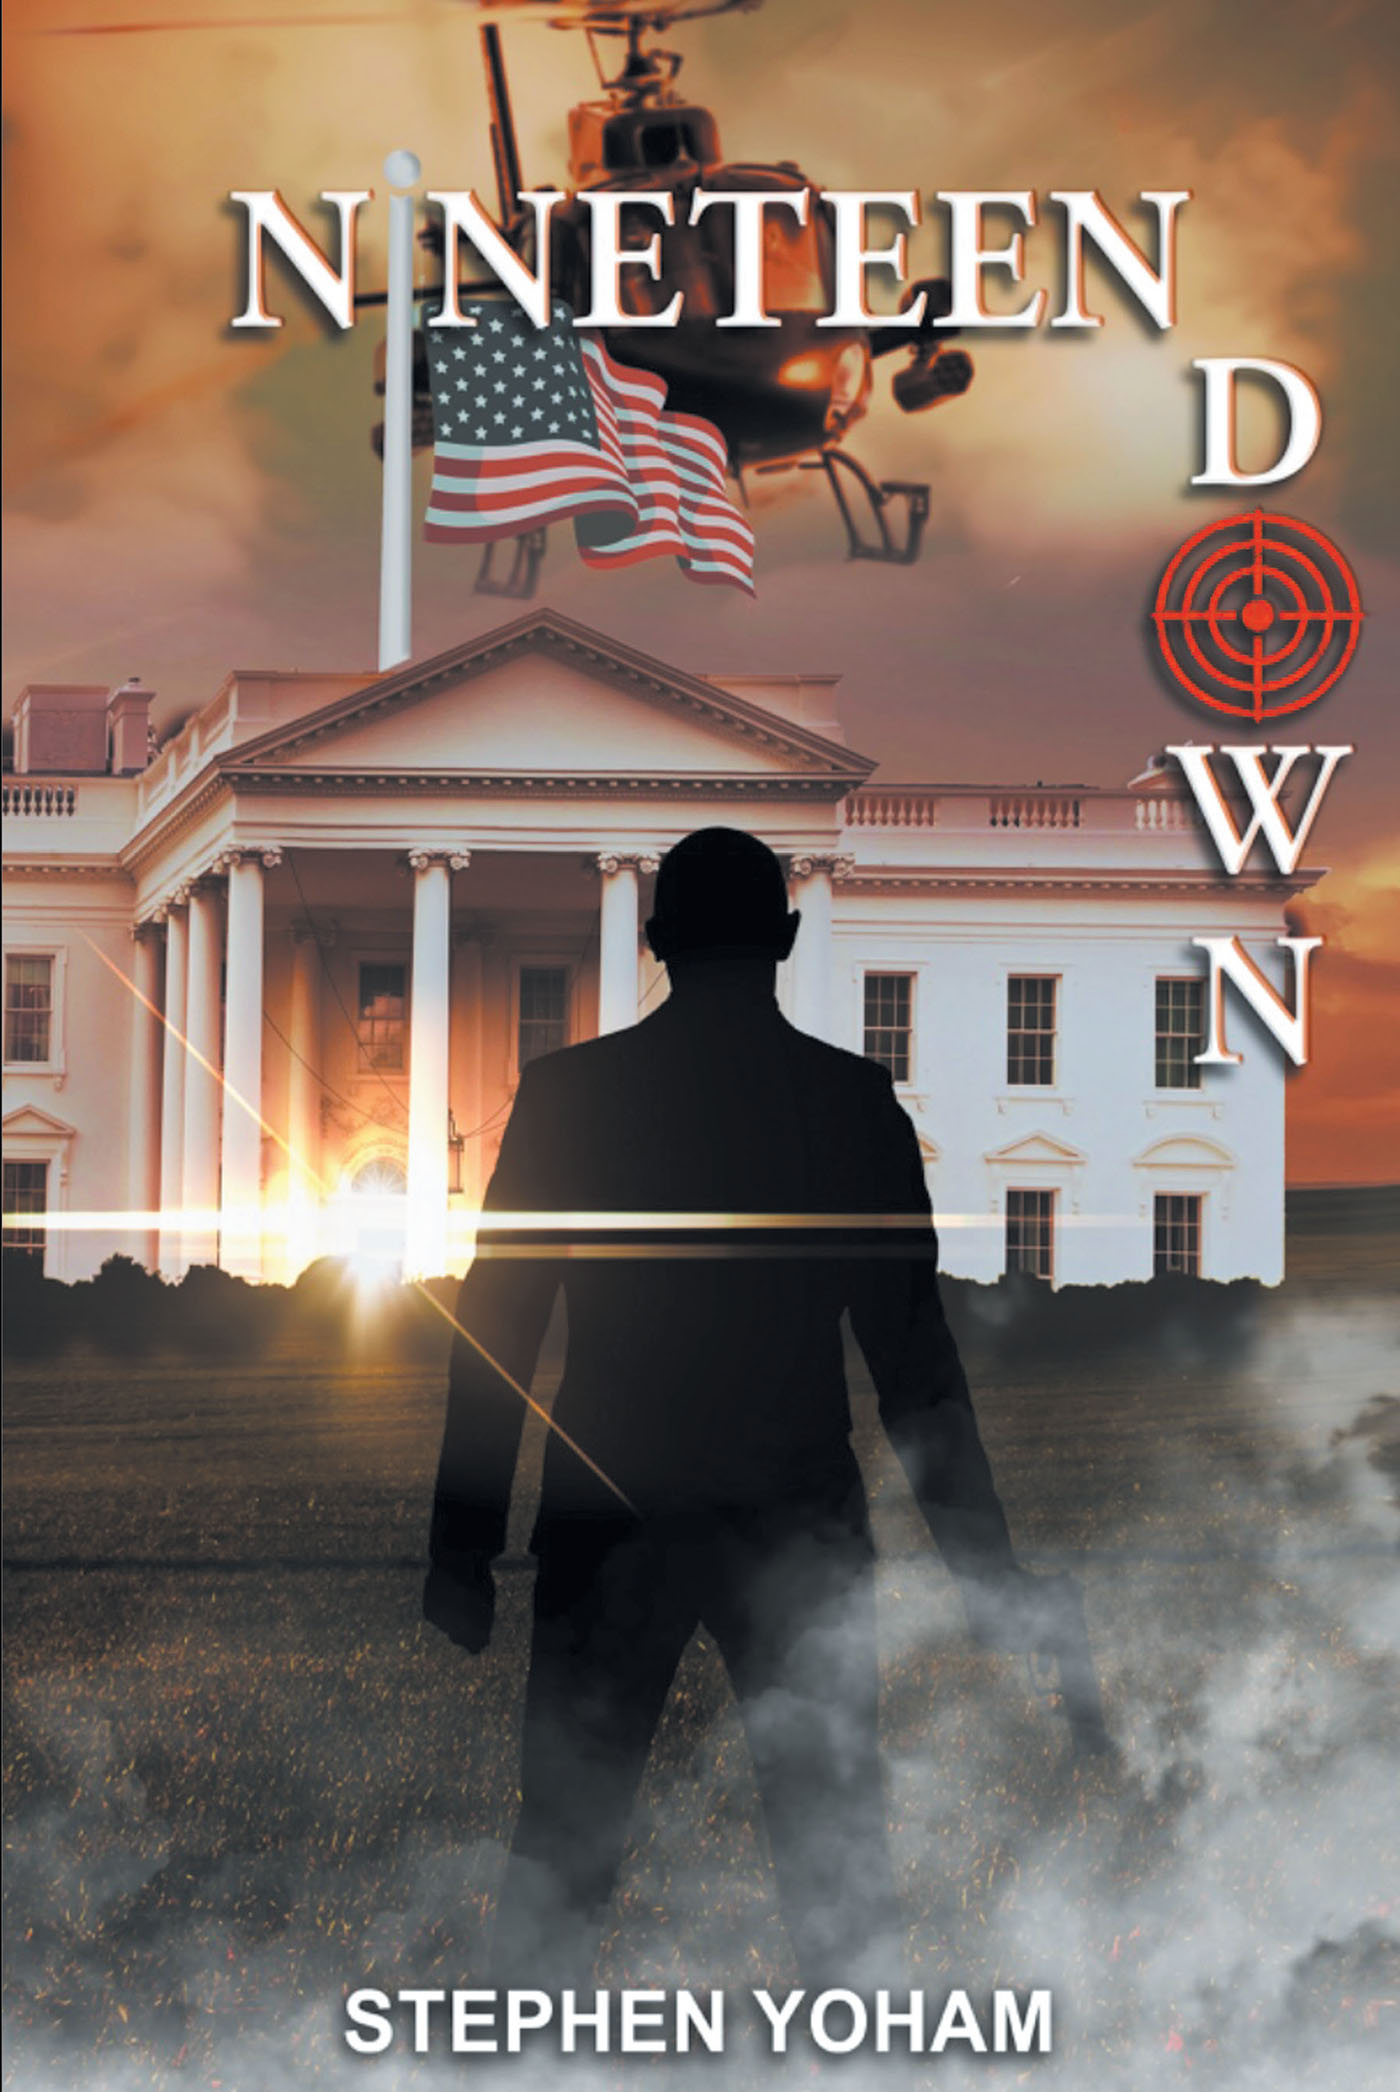 Author Stephen Yoham’s New Book, "Nineteen Down," is a Captivating Story That Follows a Secret Service Agent as He Protects the President from an Attempted Assassination